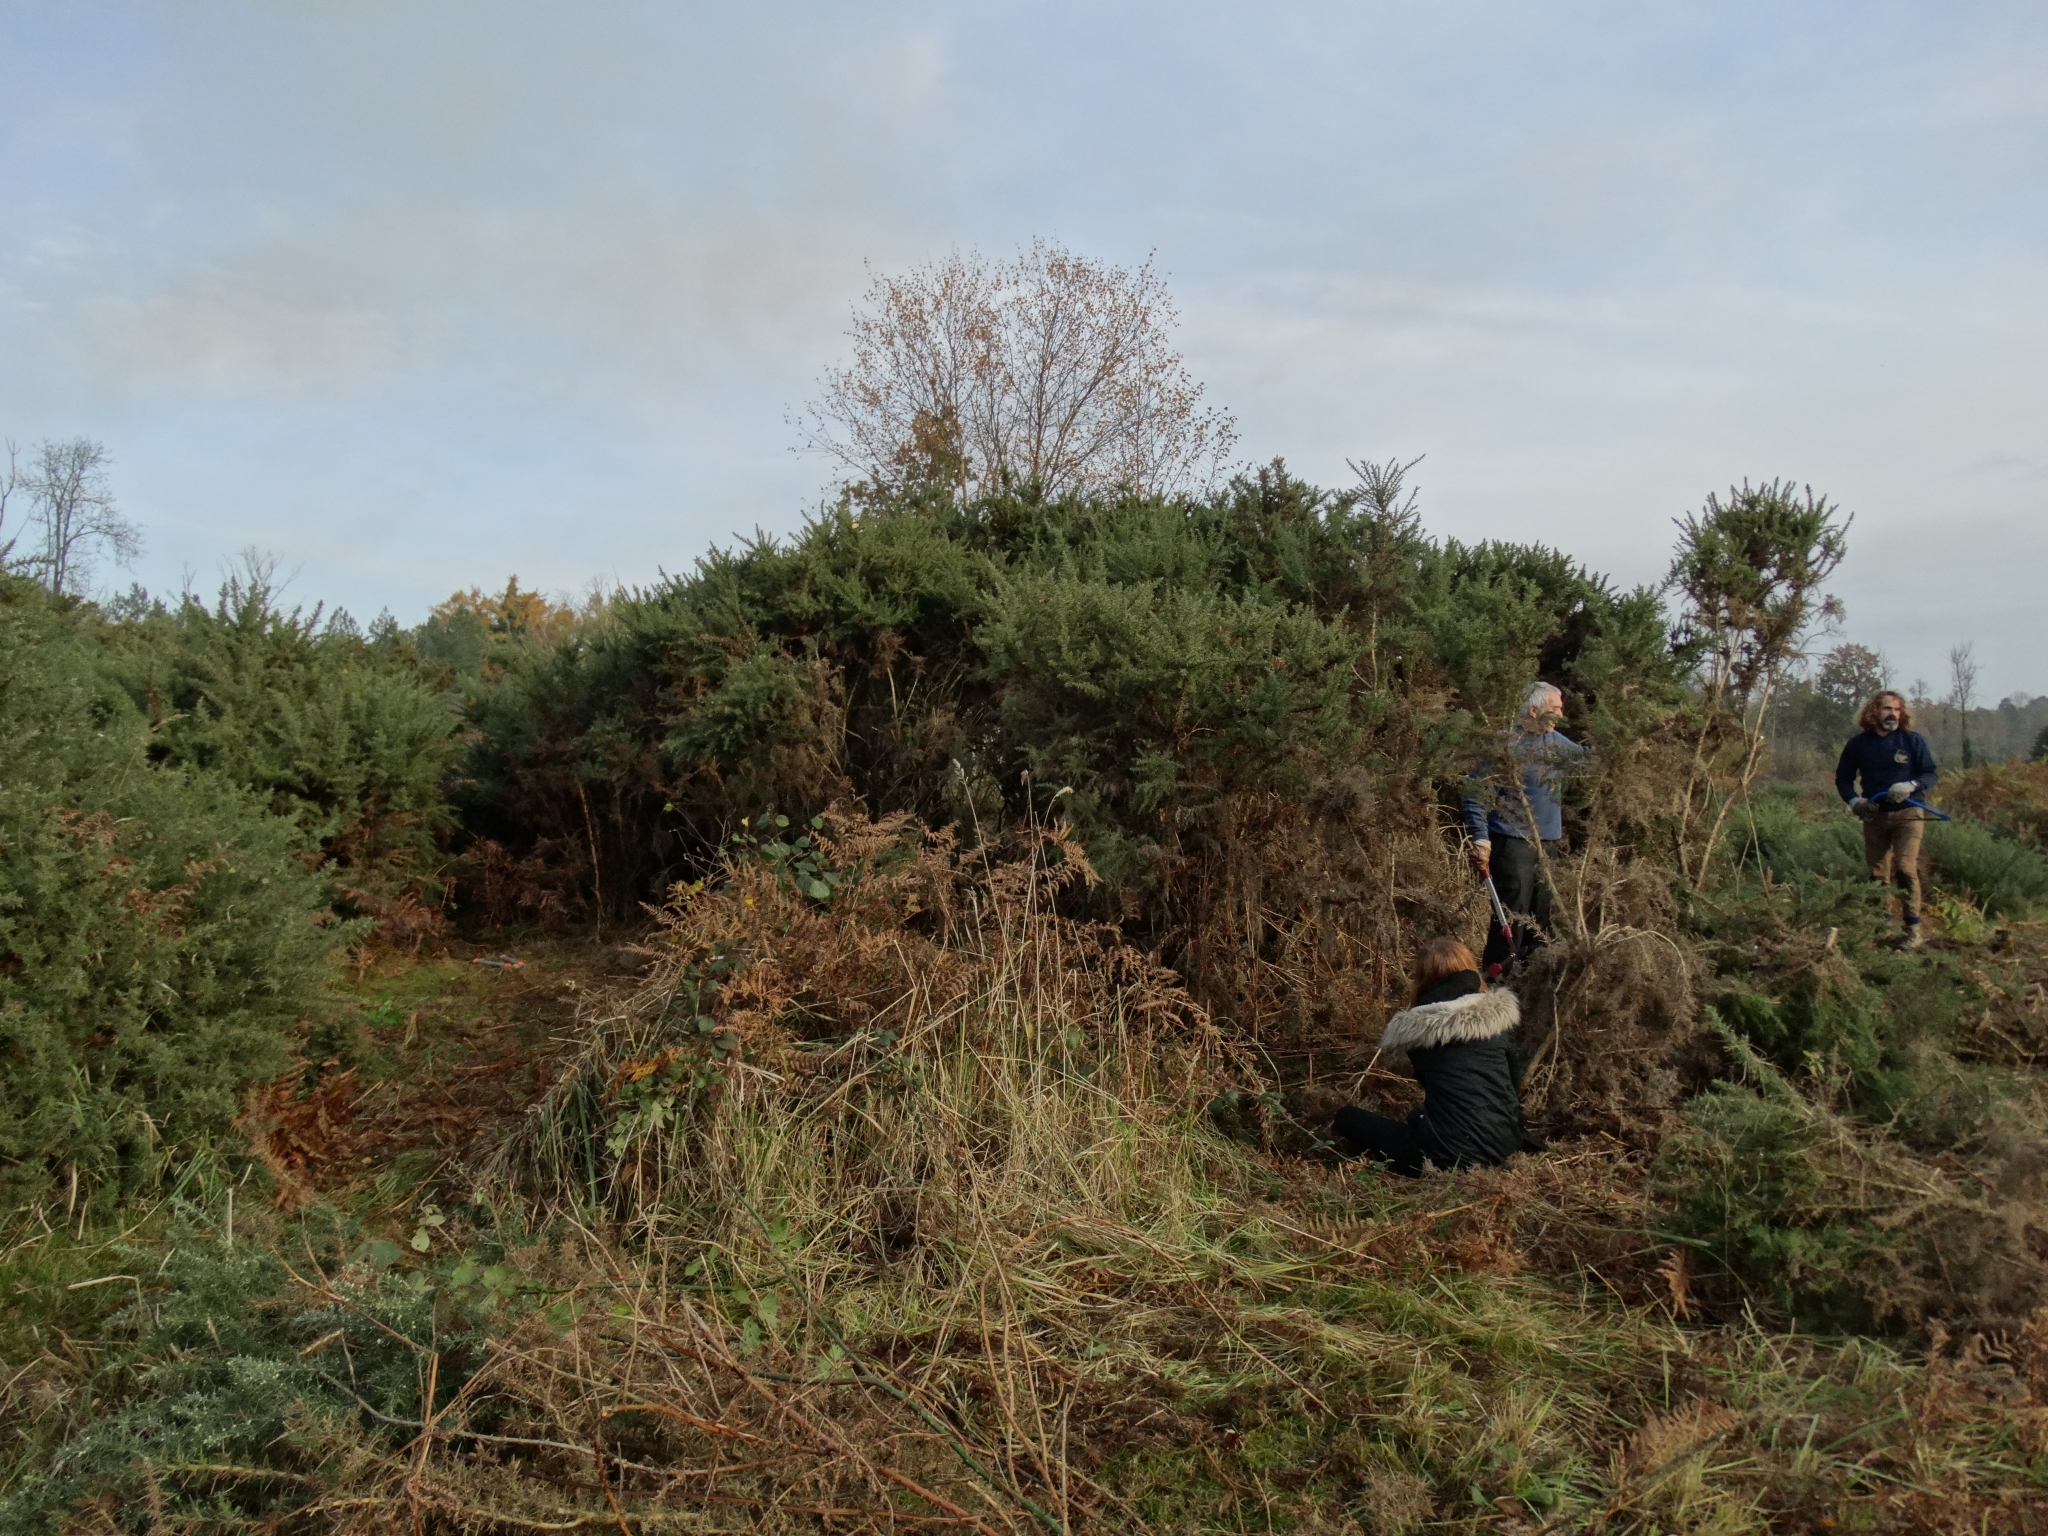 A photo from the FoTF Conservation Event - November 2019 - Gorse Clearance at Hockham Hills & Holes : Volunteer tackle a Gorse bush